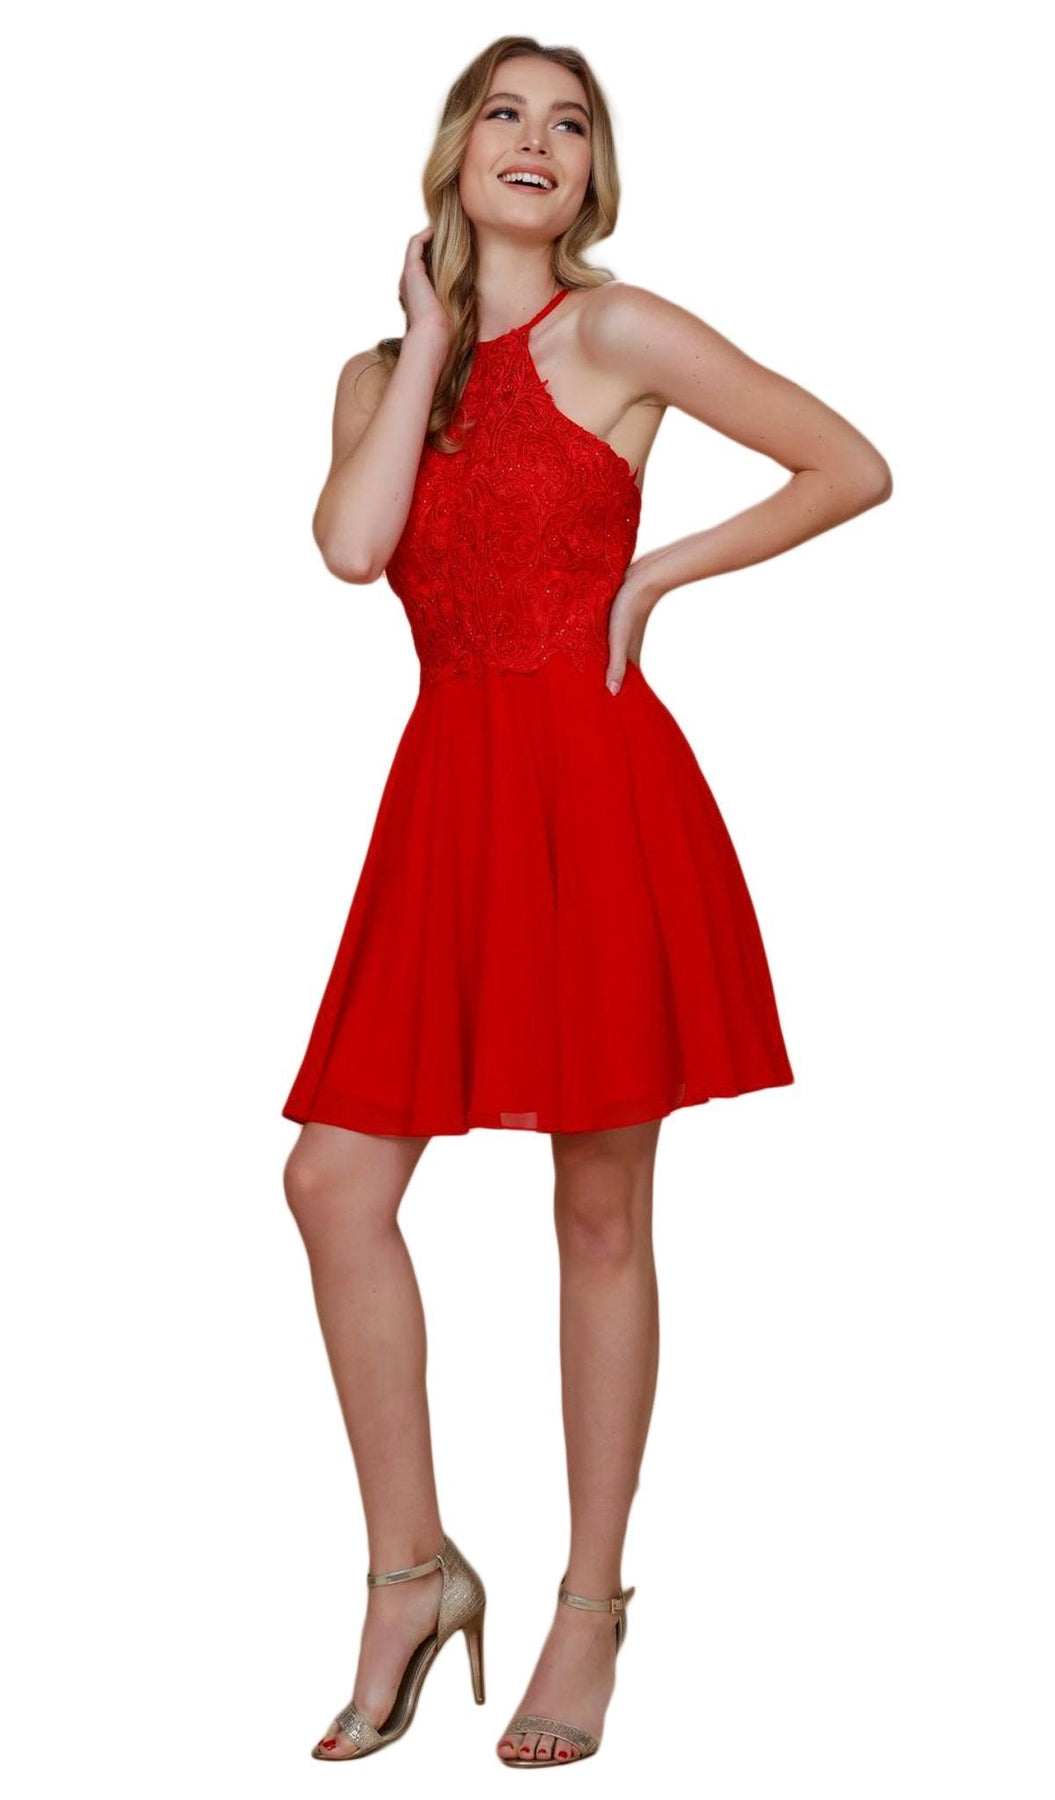 Nox Anabel - A615 Embroidered Halter Neck Chiffon A-line Dress Special Occasion Dress XS / Red